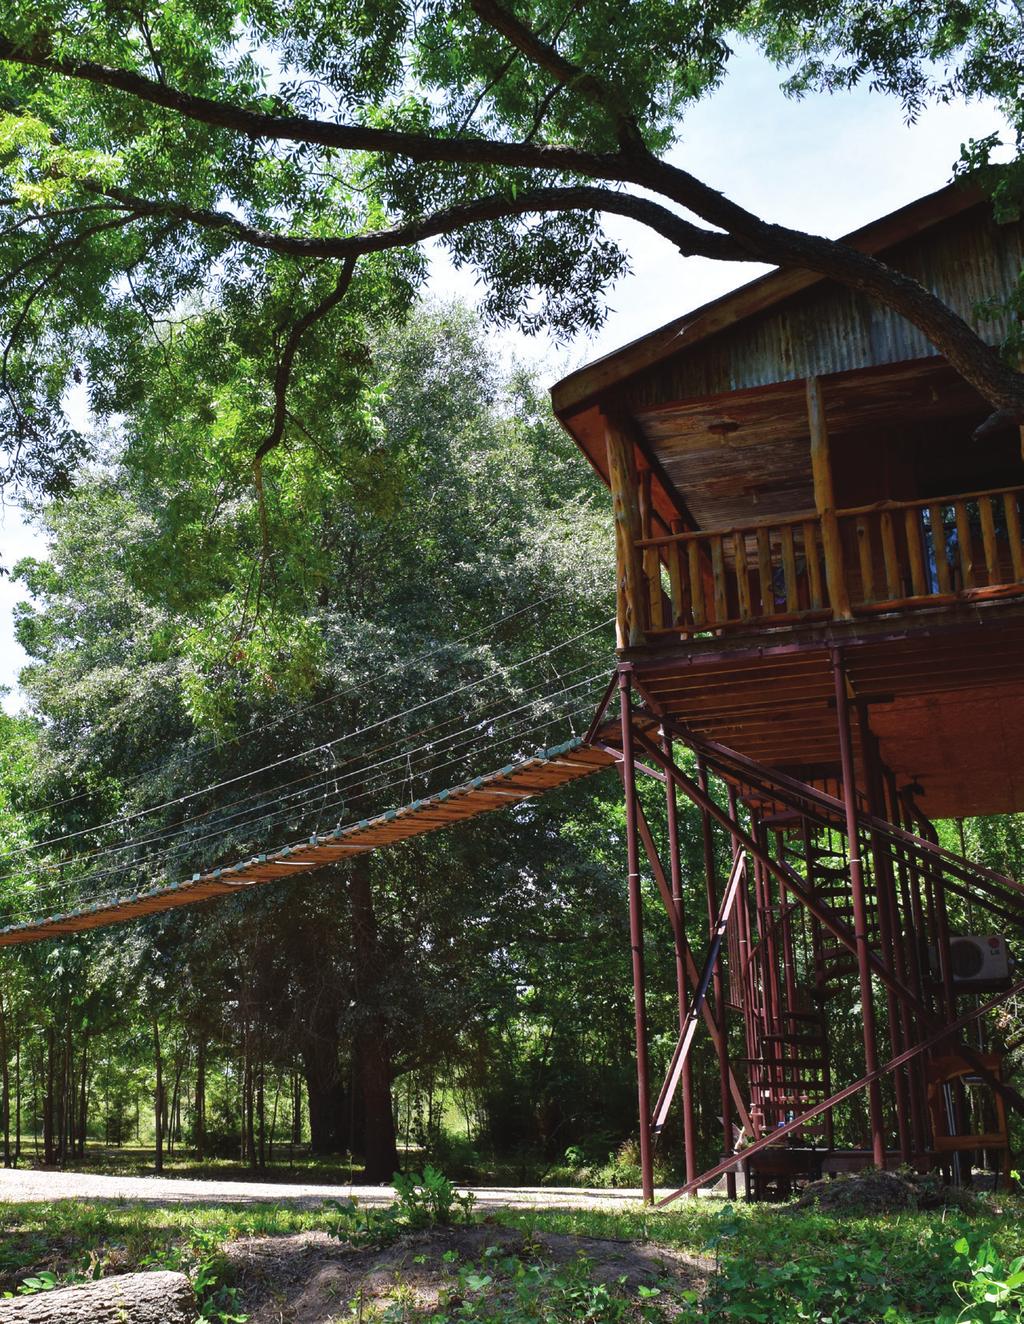 THE TREEHOUSE When we decided to name the Texas Campus it seemed only fitting to be called The Treehouse. After all, what other addiction treatment center in Texas has their own actual treehouse?